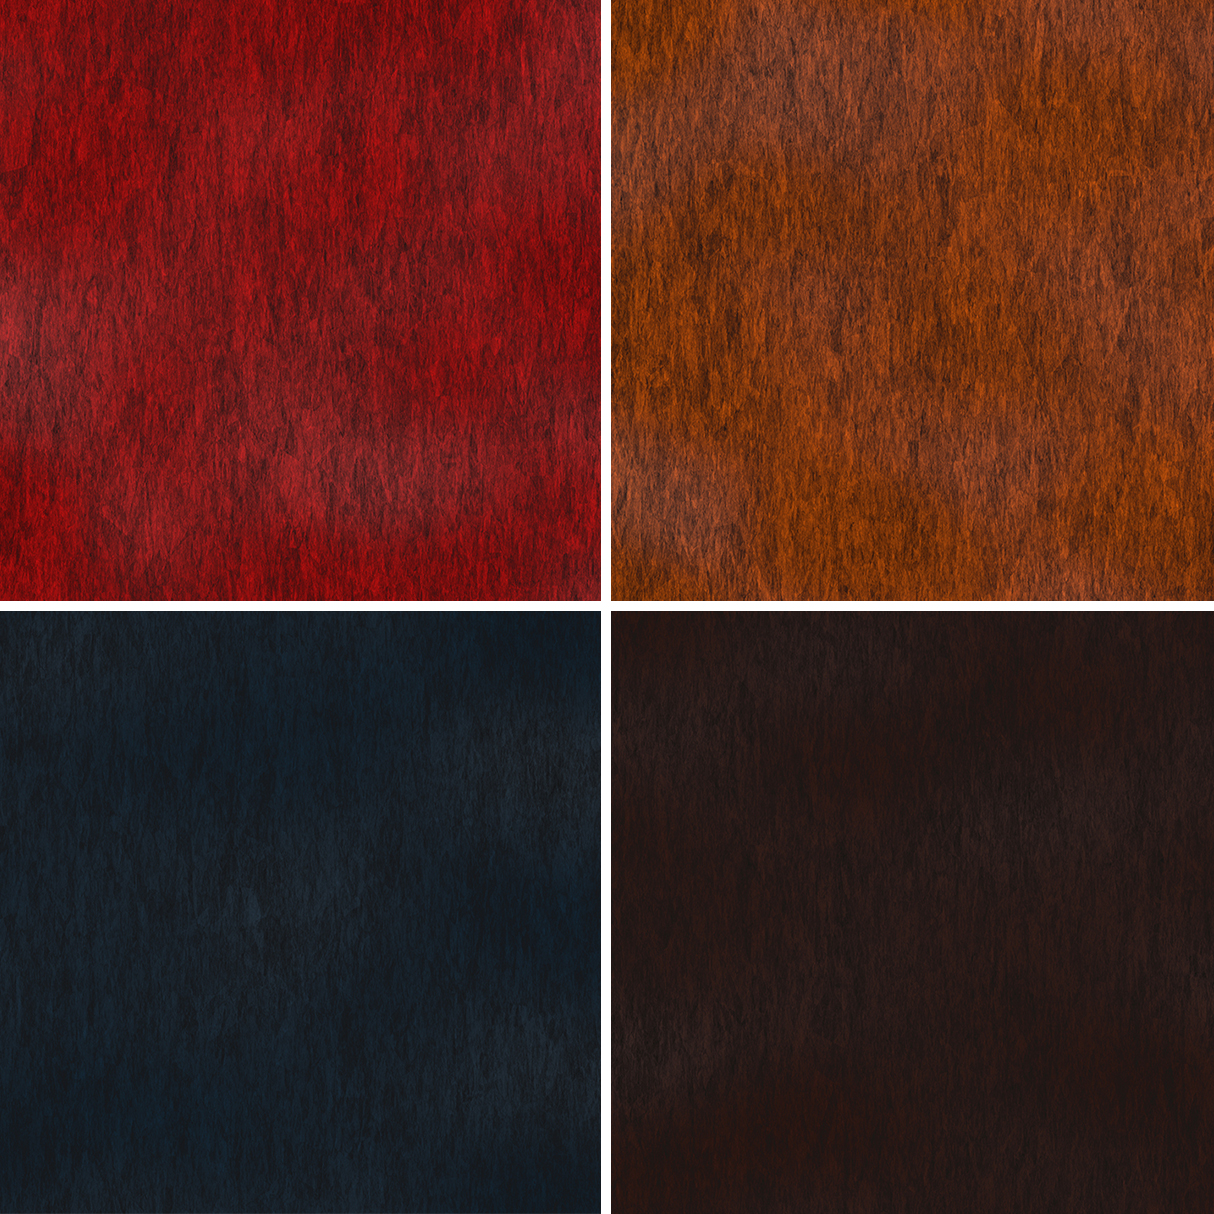 30 Suede Background Textures Samples – Part 2